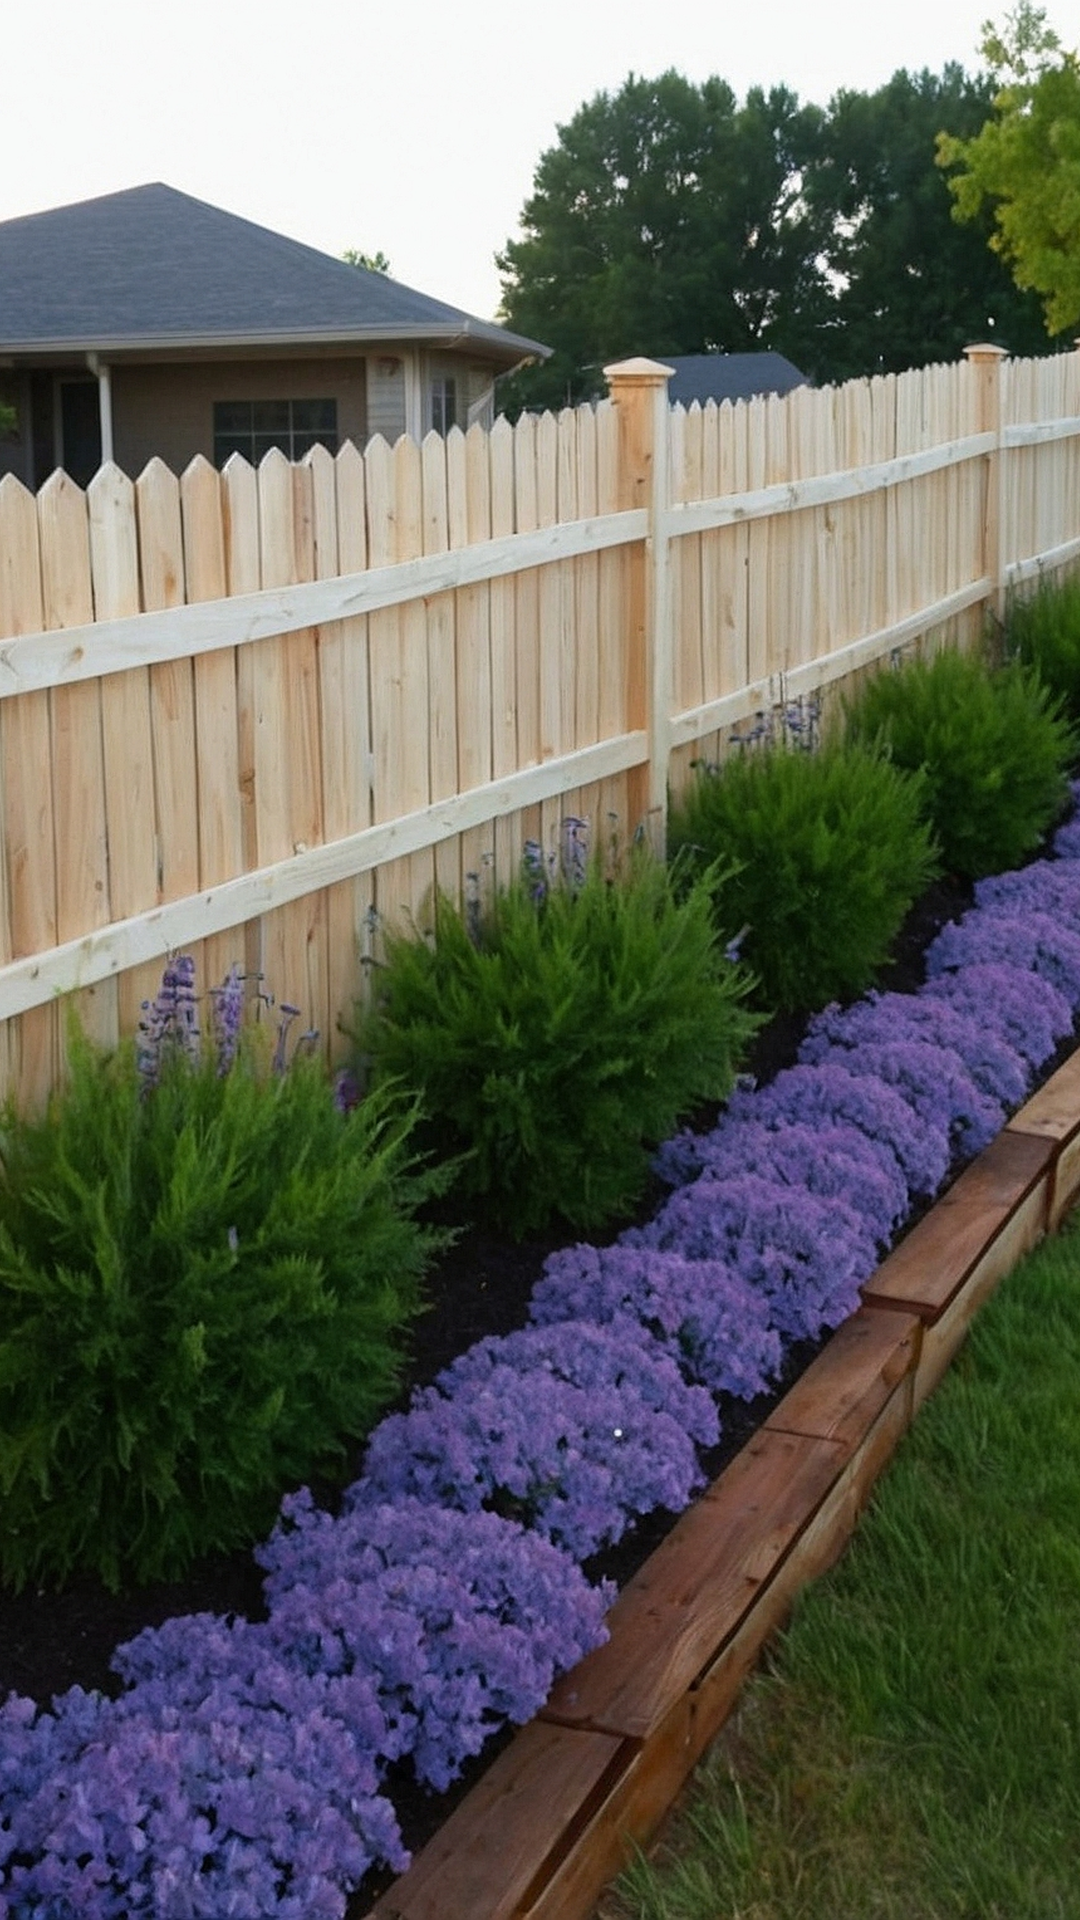 Bloom Borders: Vibrant Fence Line Landscaping